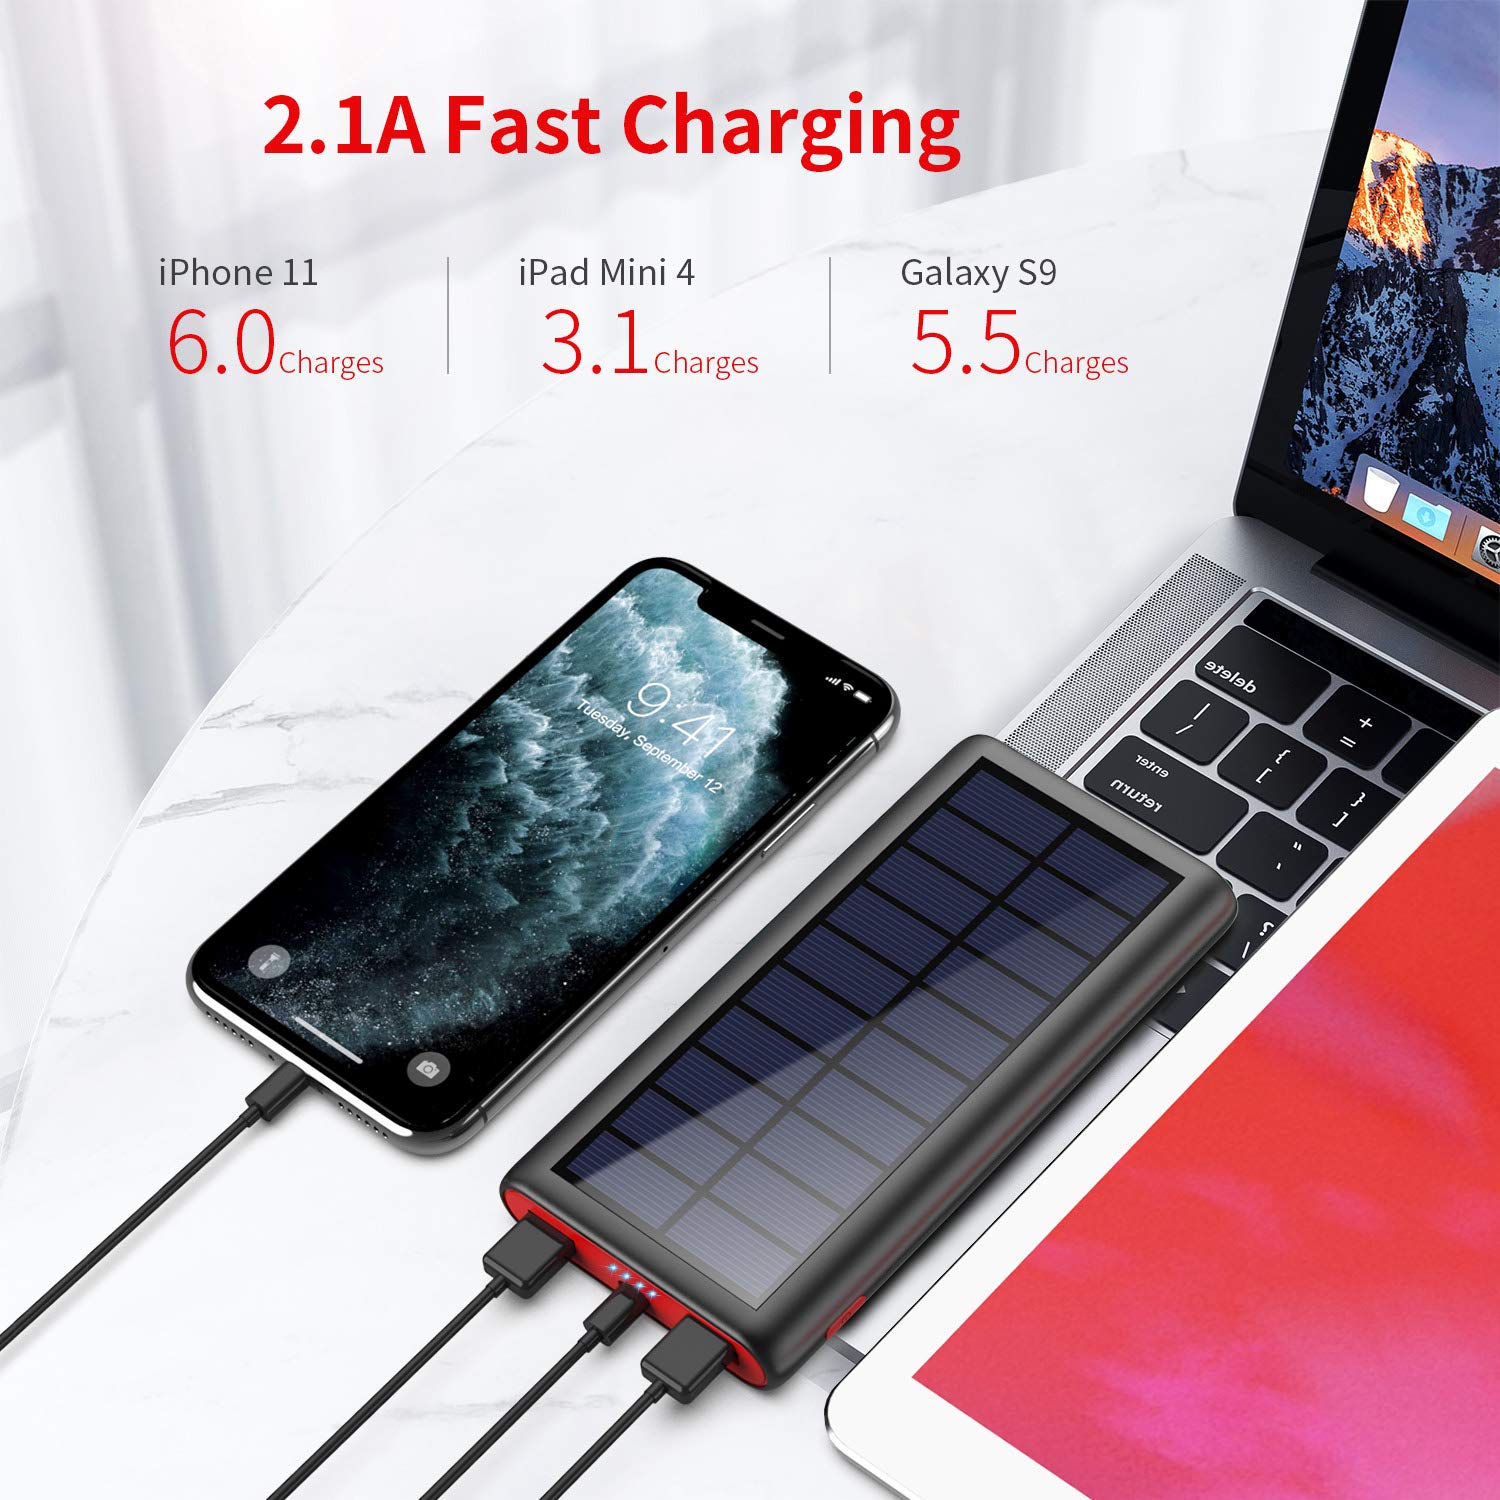 VOOE Solar Power Bank, 26800mAh Portable Charger Fast Charging External Battery Pack with Dual USB Output High Capacity Portable Phone Charger for Smart Phones Tablets and More